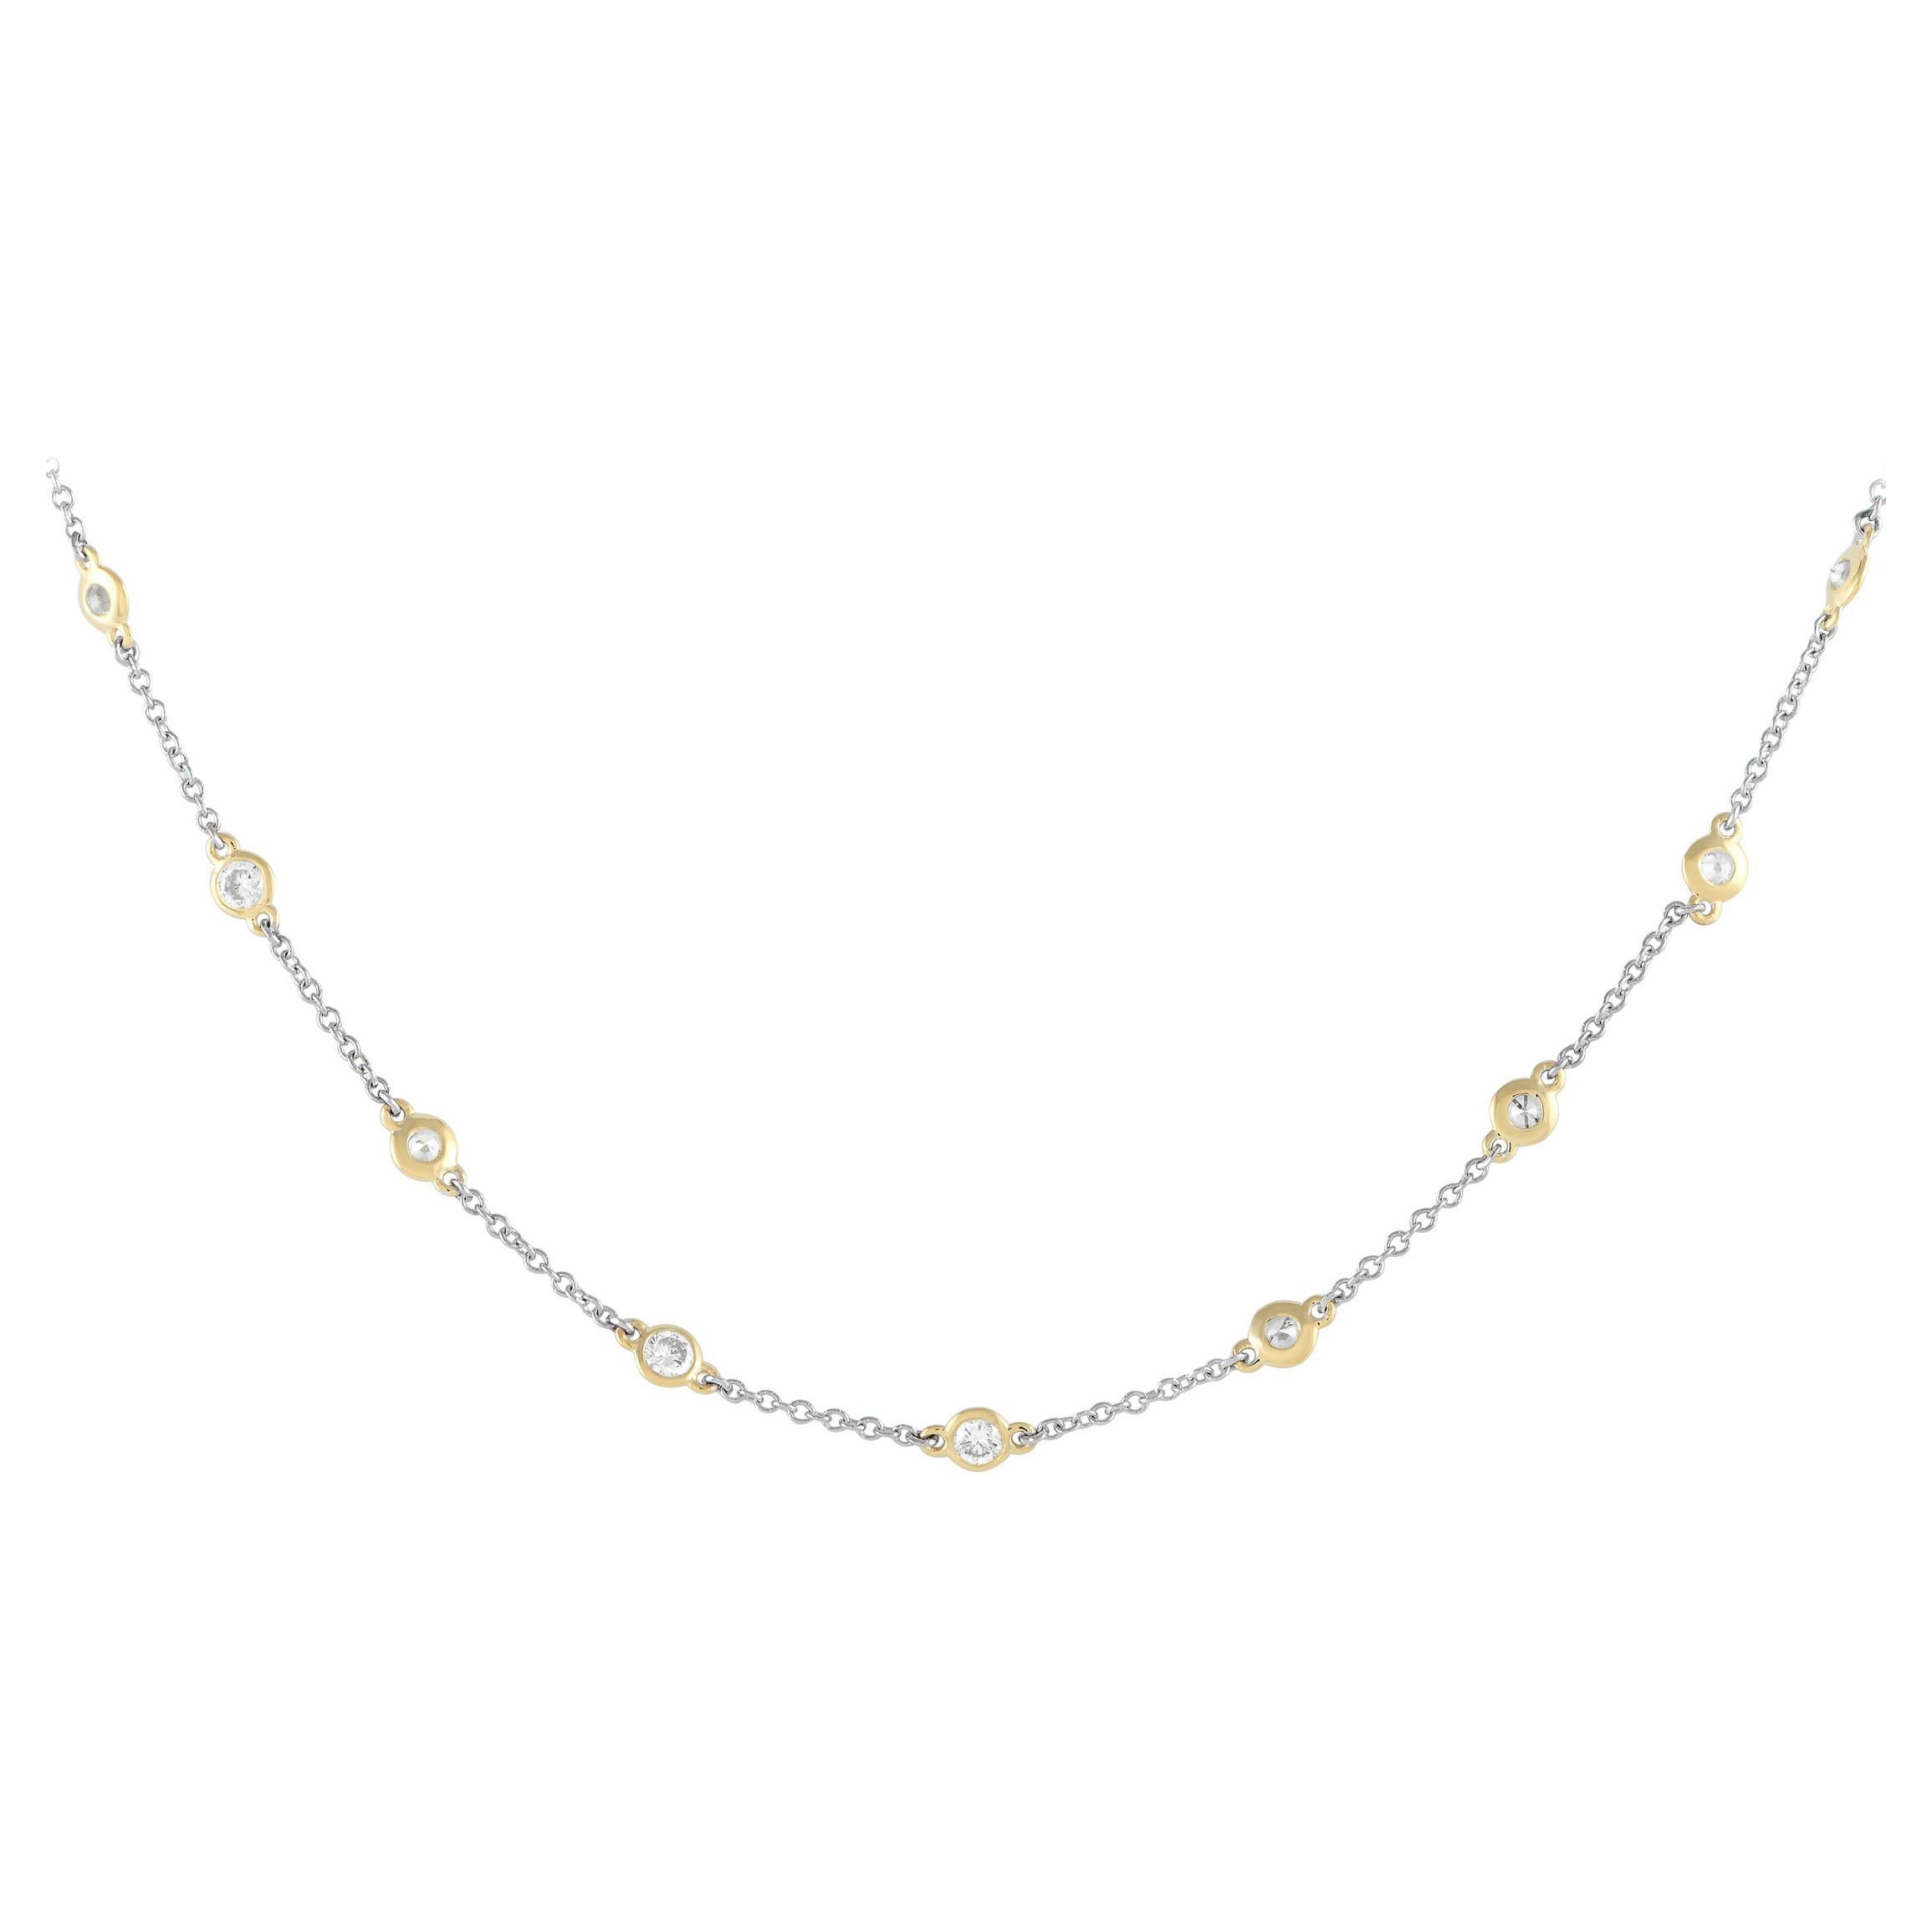 LB Exclusive 18K White and Rose Gold 1.56ct Diamond Station Necklace ...